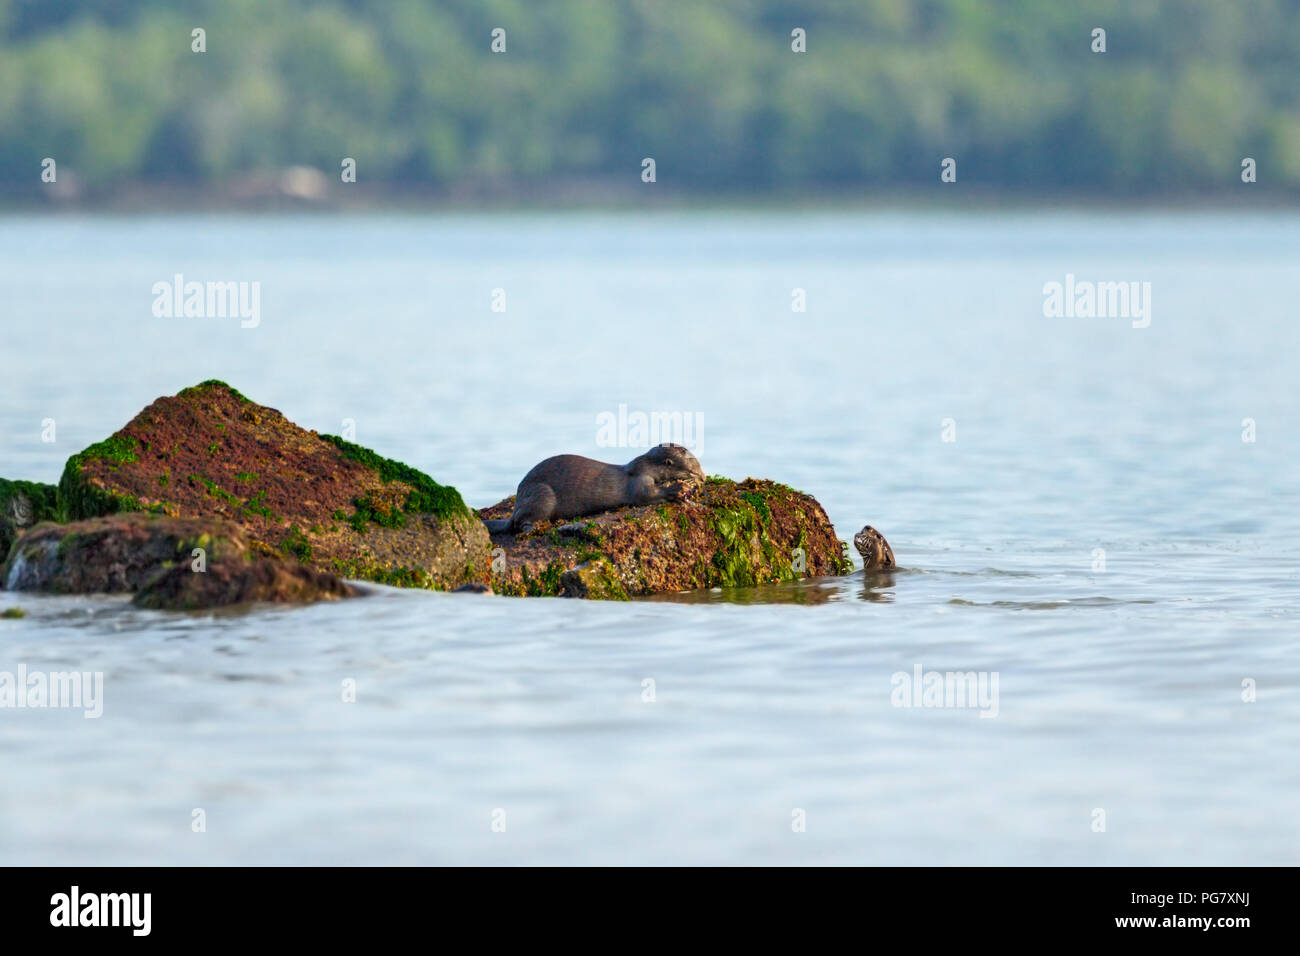 Hunting party of Smooth-coated Otters fishing in sea with forested island in background, Singapore Stock Photo